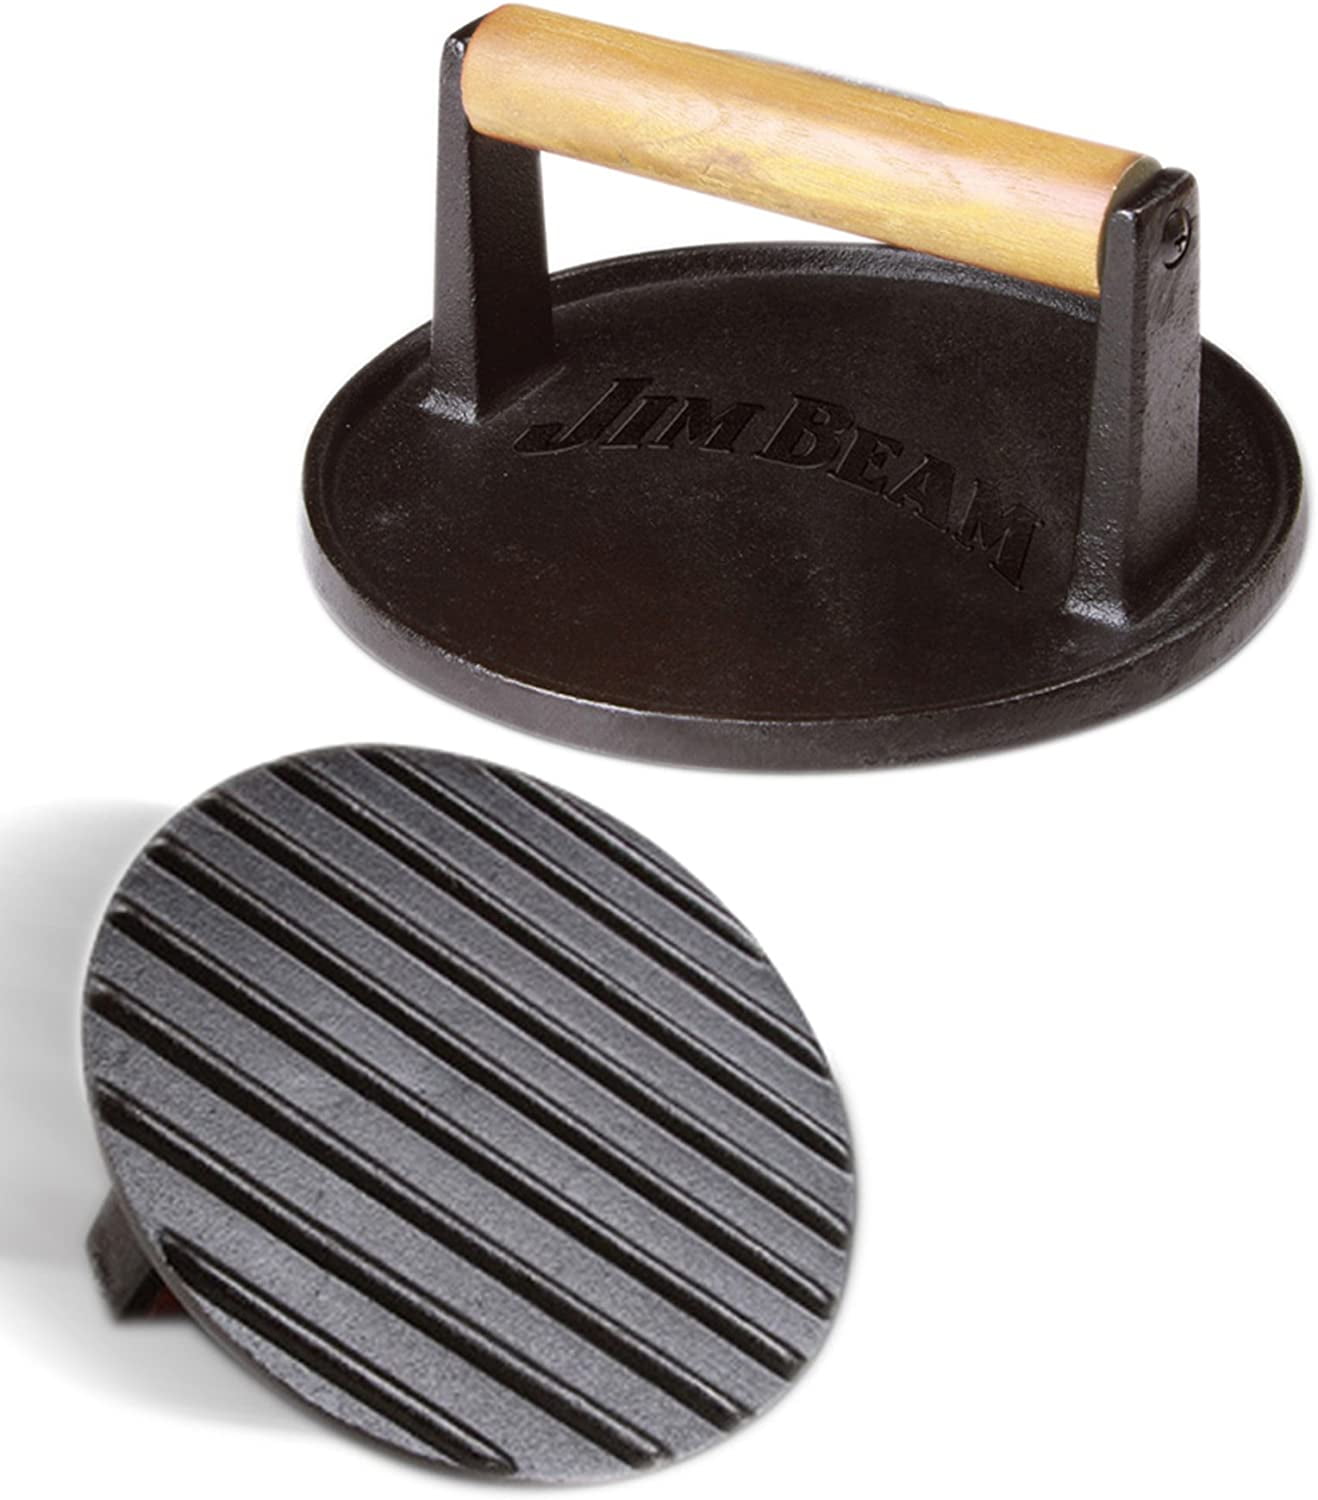 Cast Iron Beef Press Board Perfect for Burgers Steaks Sandwiches with  Versatile Heat-Resistant Wooden Handle - AliExpress